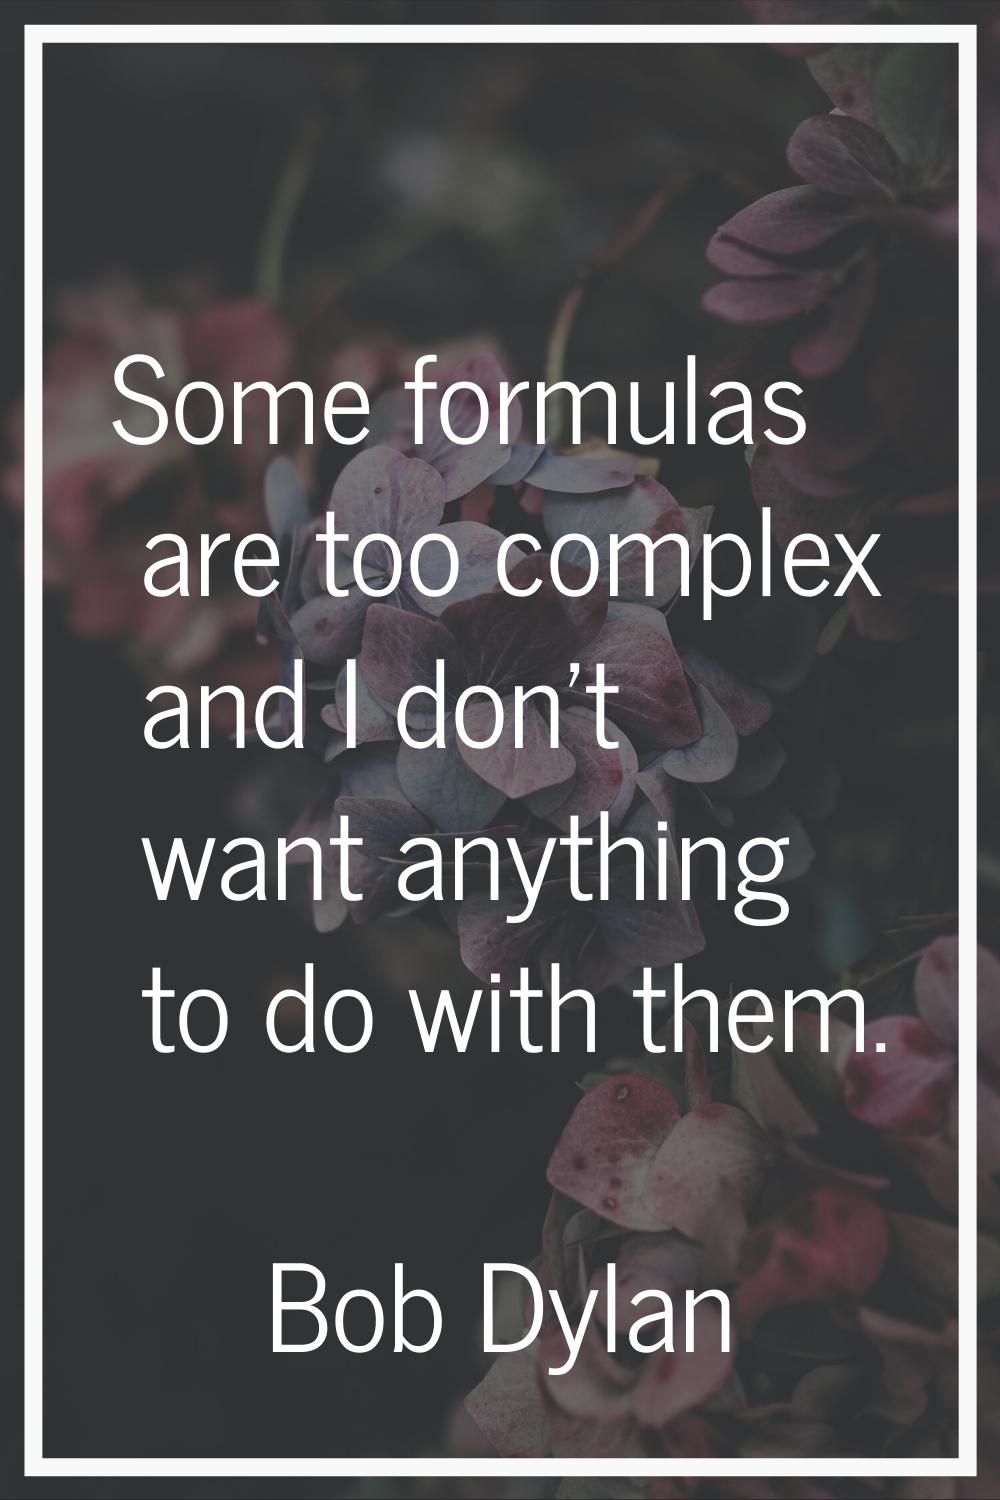 Some formulas are too complex and I don't want anything to do with them.